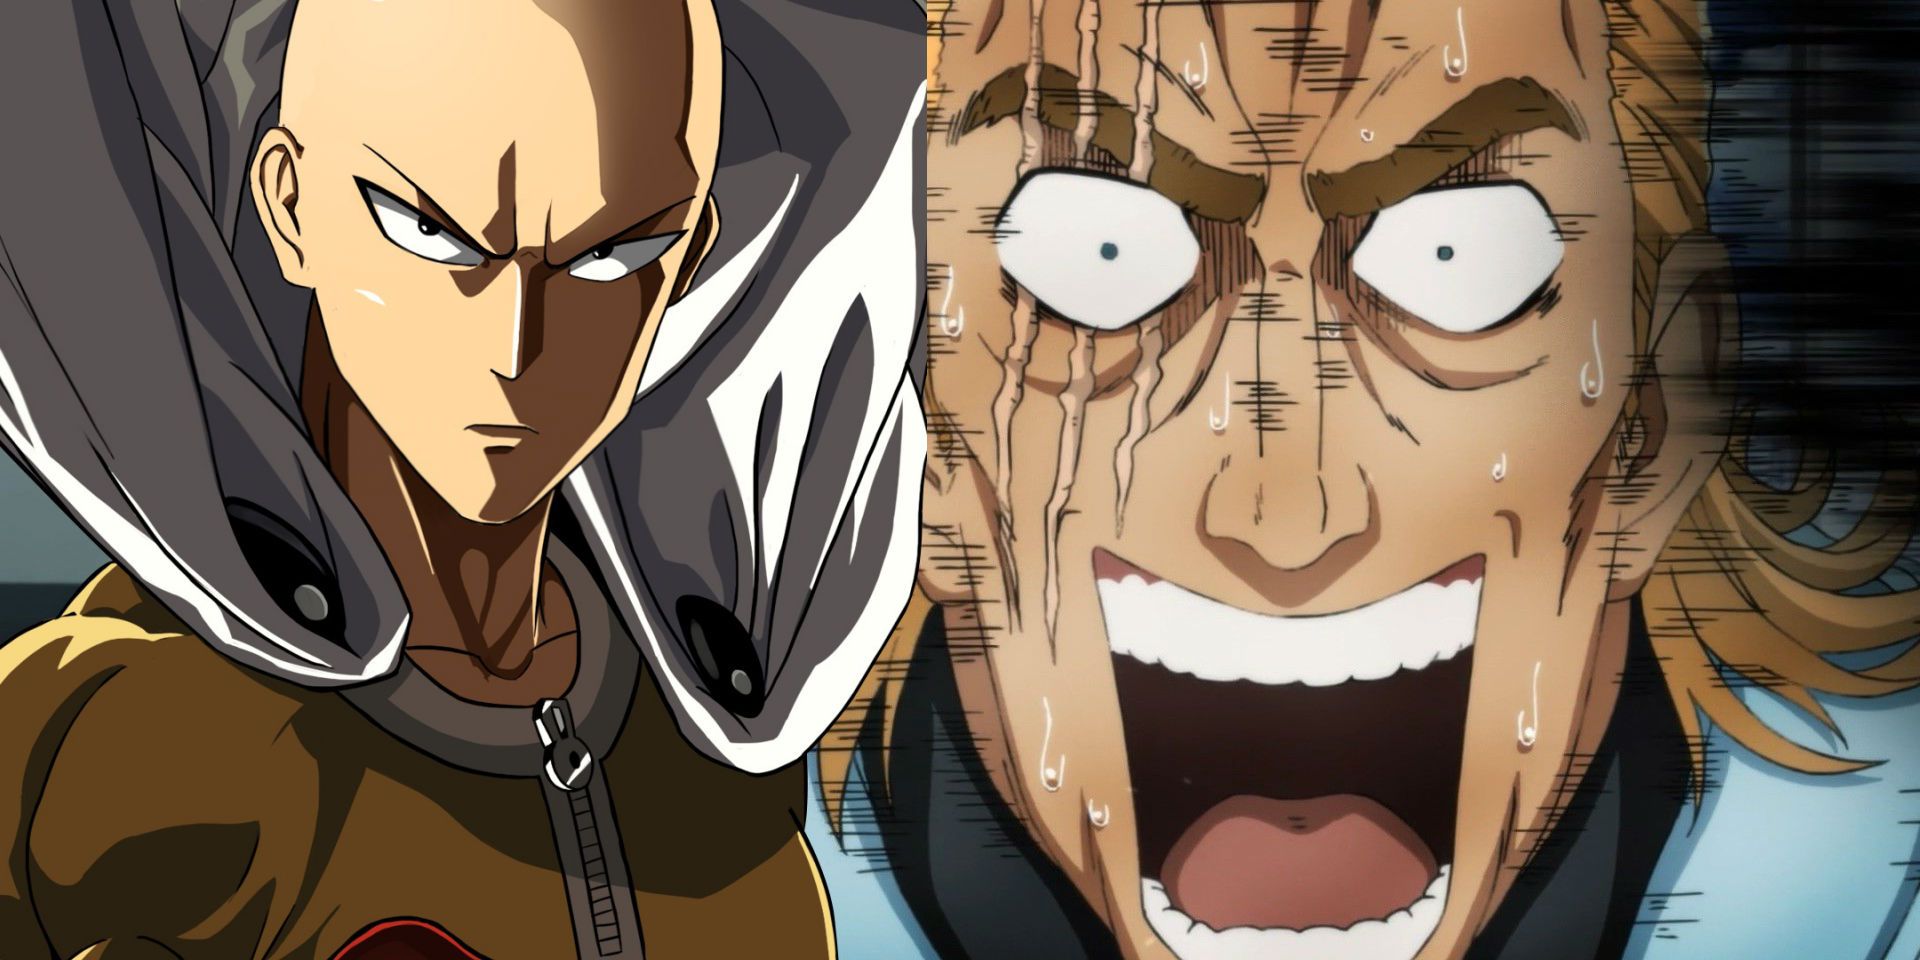 OnePunch Man Season 2 Trailer and Release Date Confirmed For April